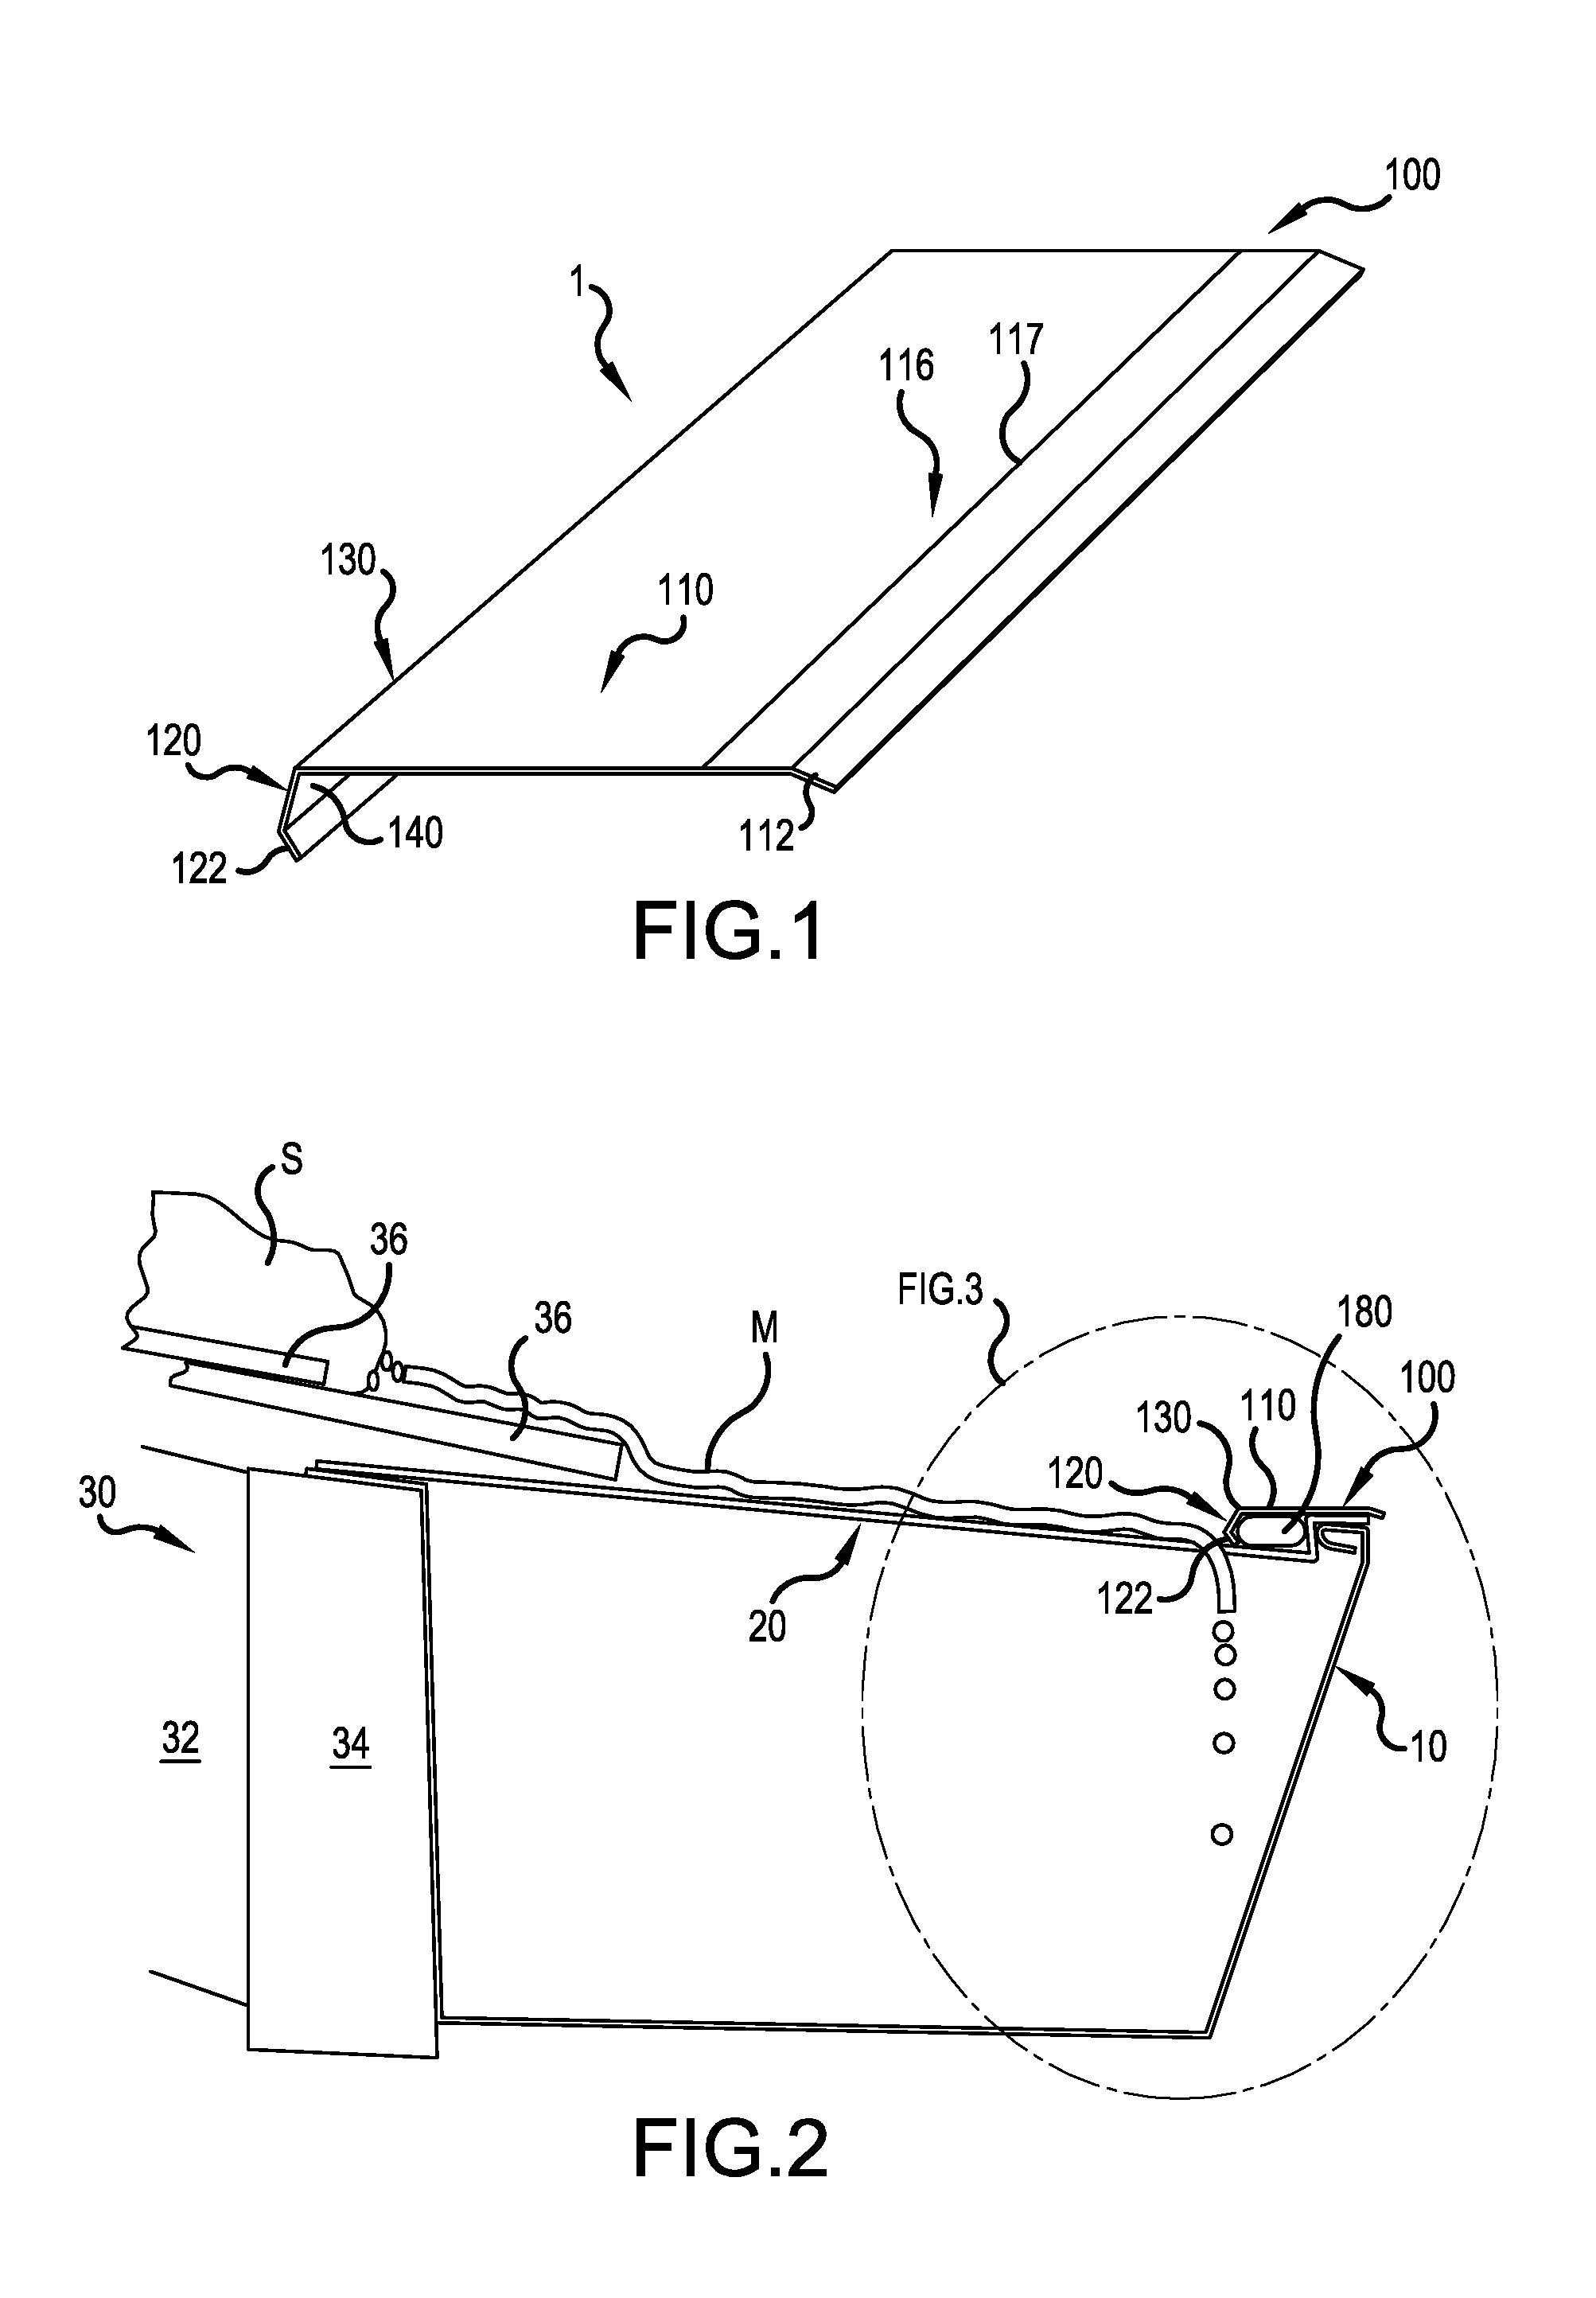 Heated Cable Cover for Gutter Debris Preclusion Devices